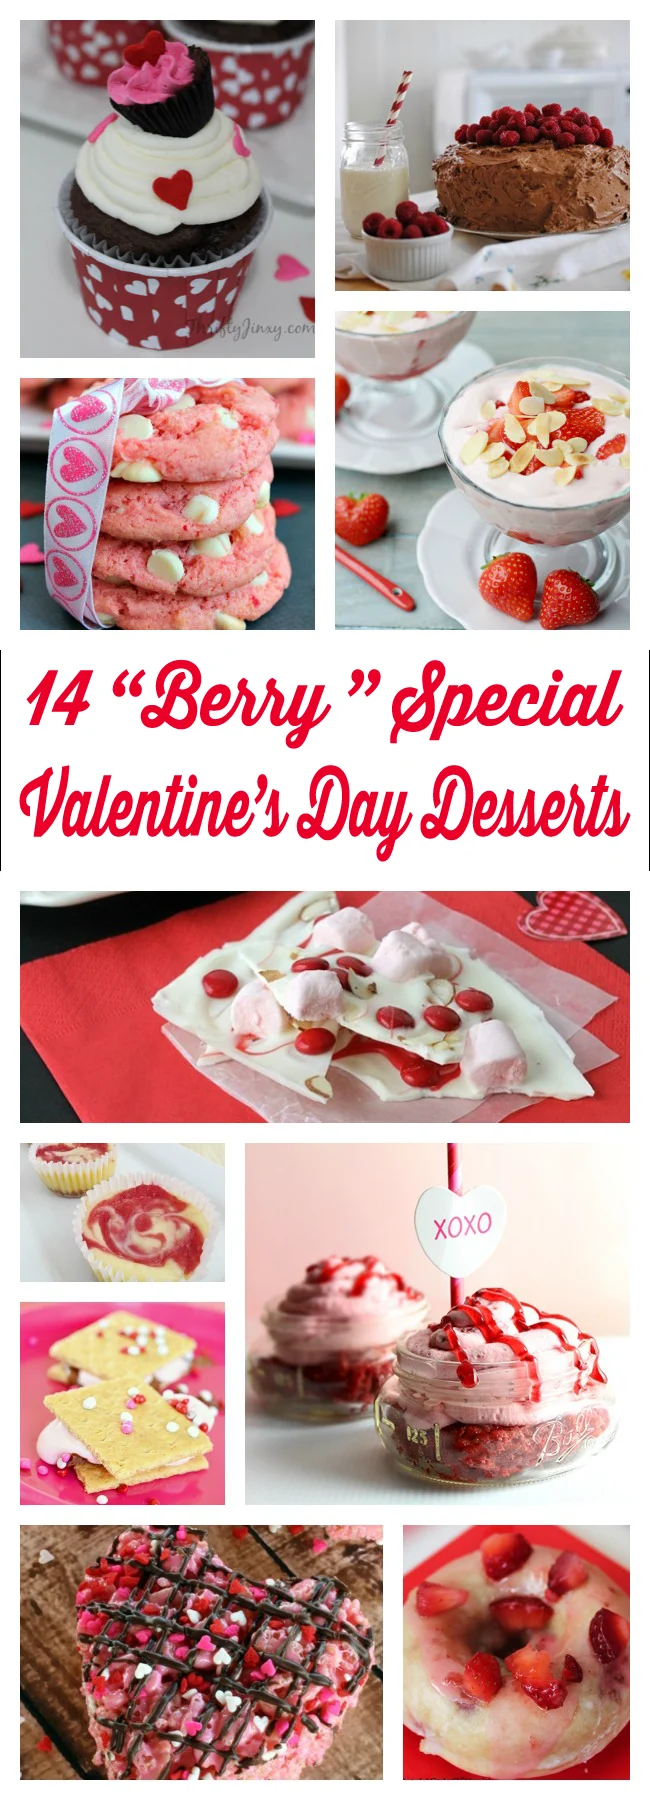 Make this Valentine's Day extra sweet with berry flavored desserts. Strawberries, raspberries galore!